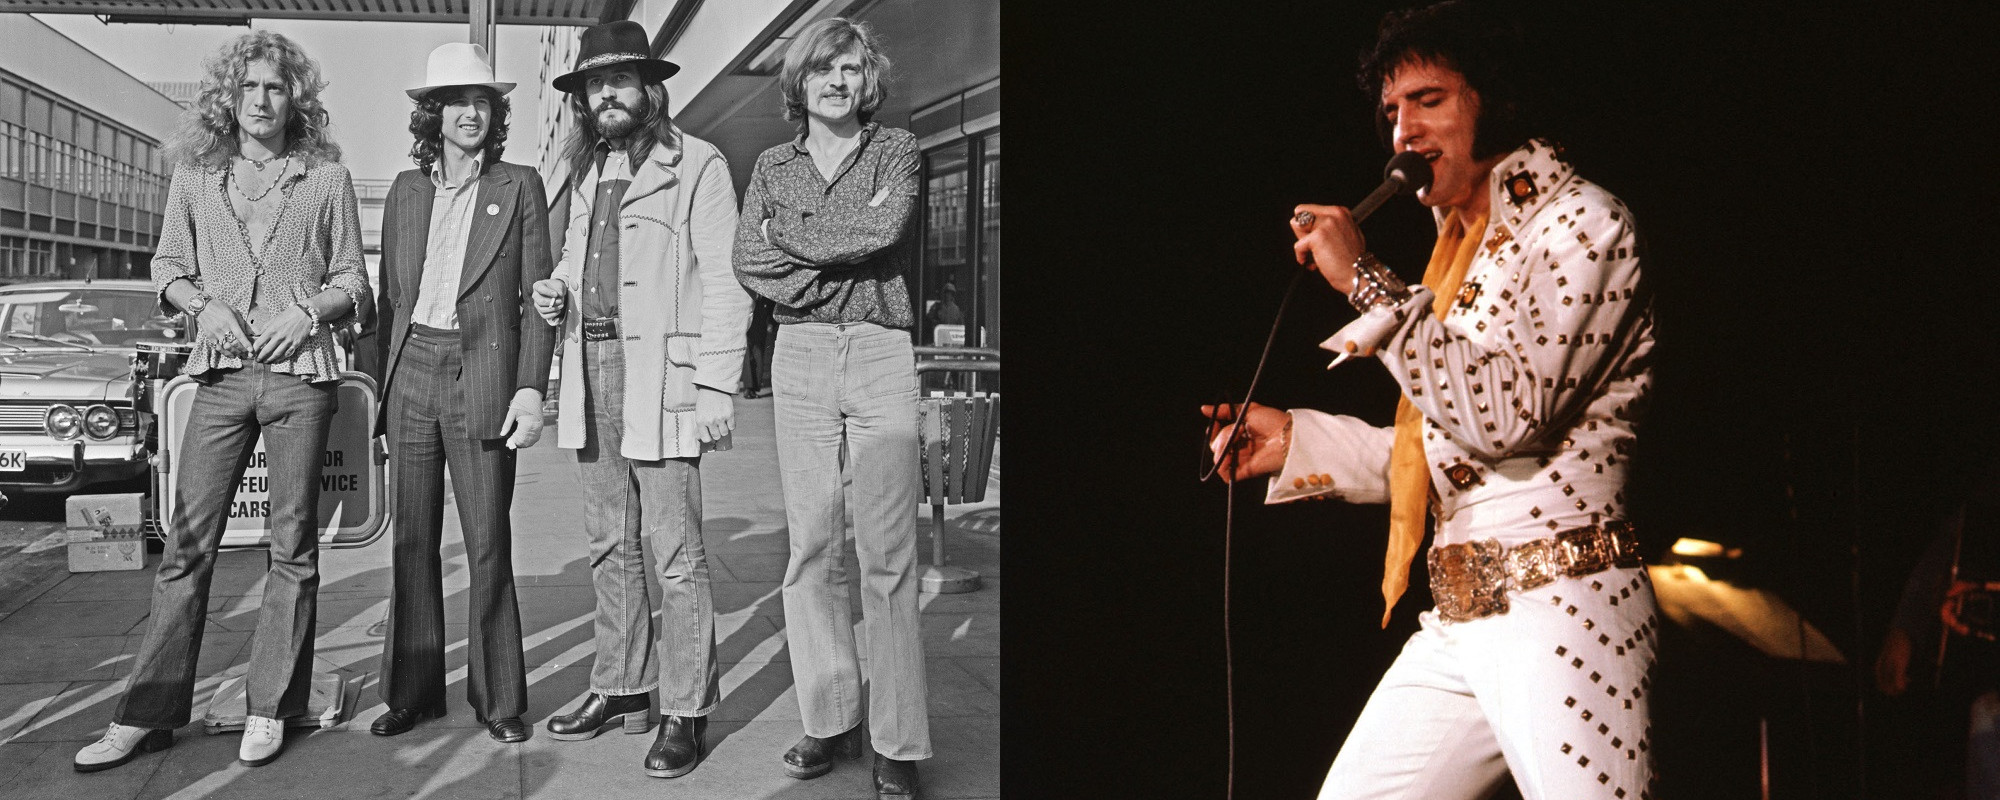 50 Years Ago Led Zeppelin Had a “Dream Come True” Meeting Elvis Presley: “I Mopped the Tears Away”